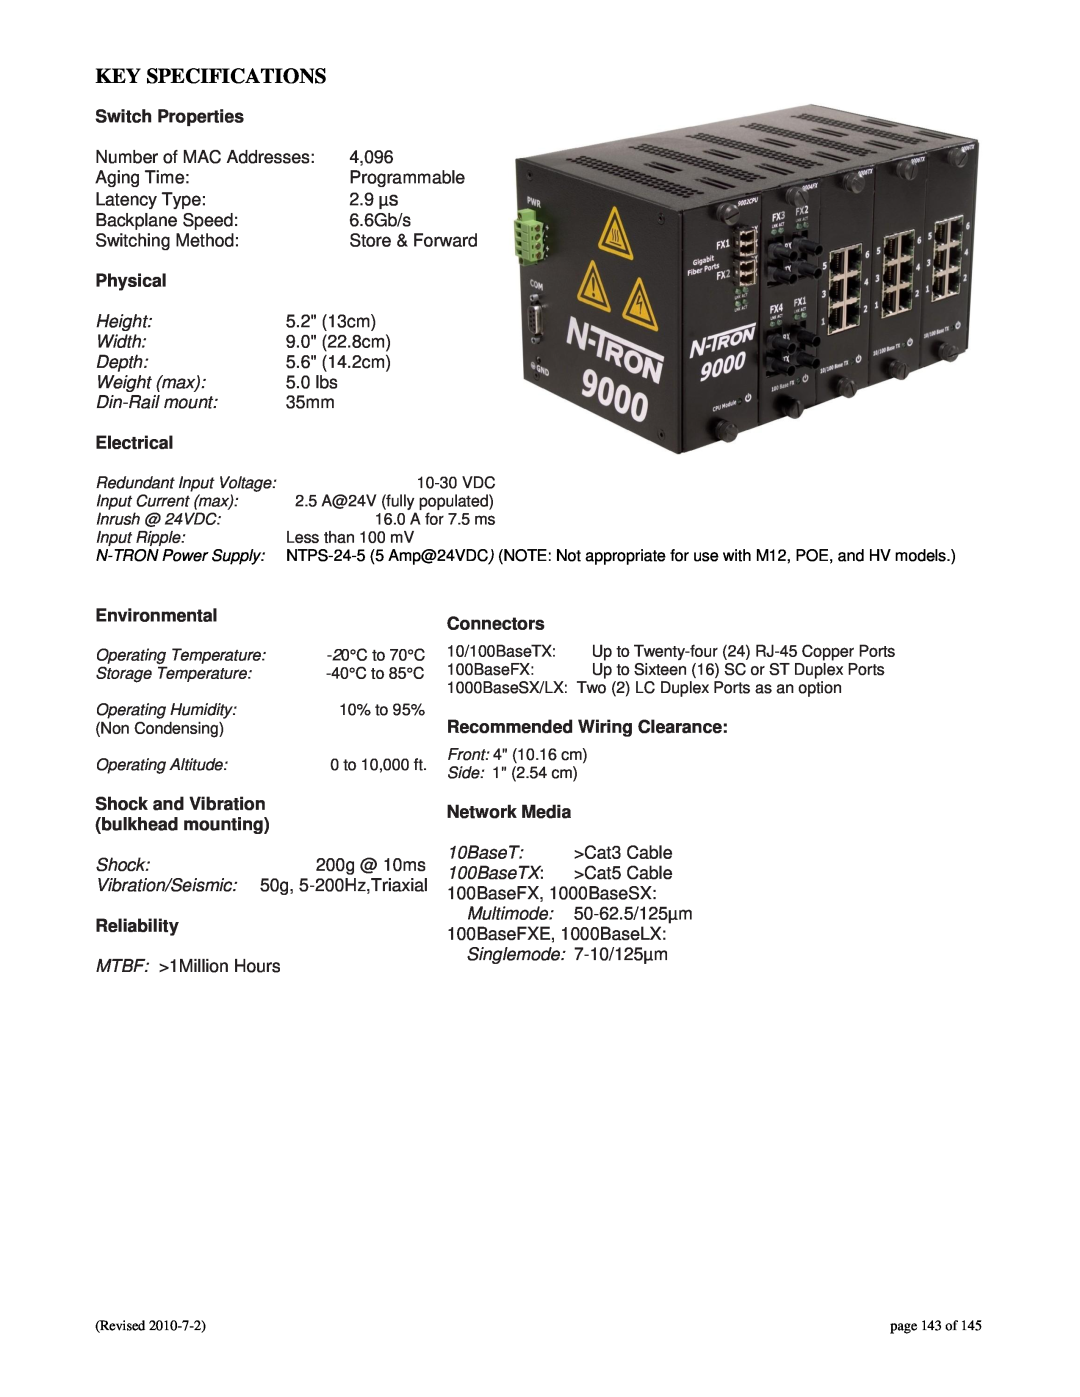 N-Tron 9000 Key Specifications, Switch Properties, Physical, Electrical, Environmental, Shock and Vibration, Reliability 